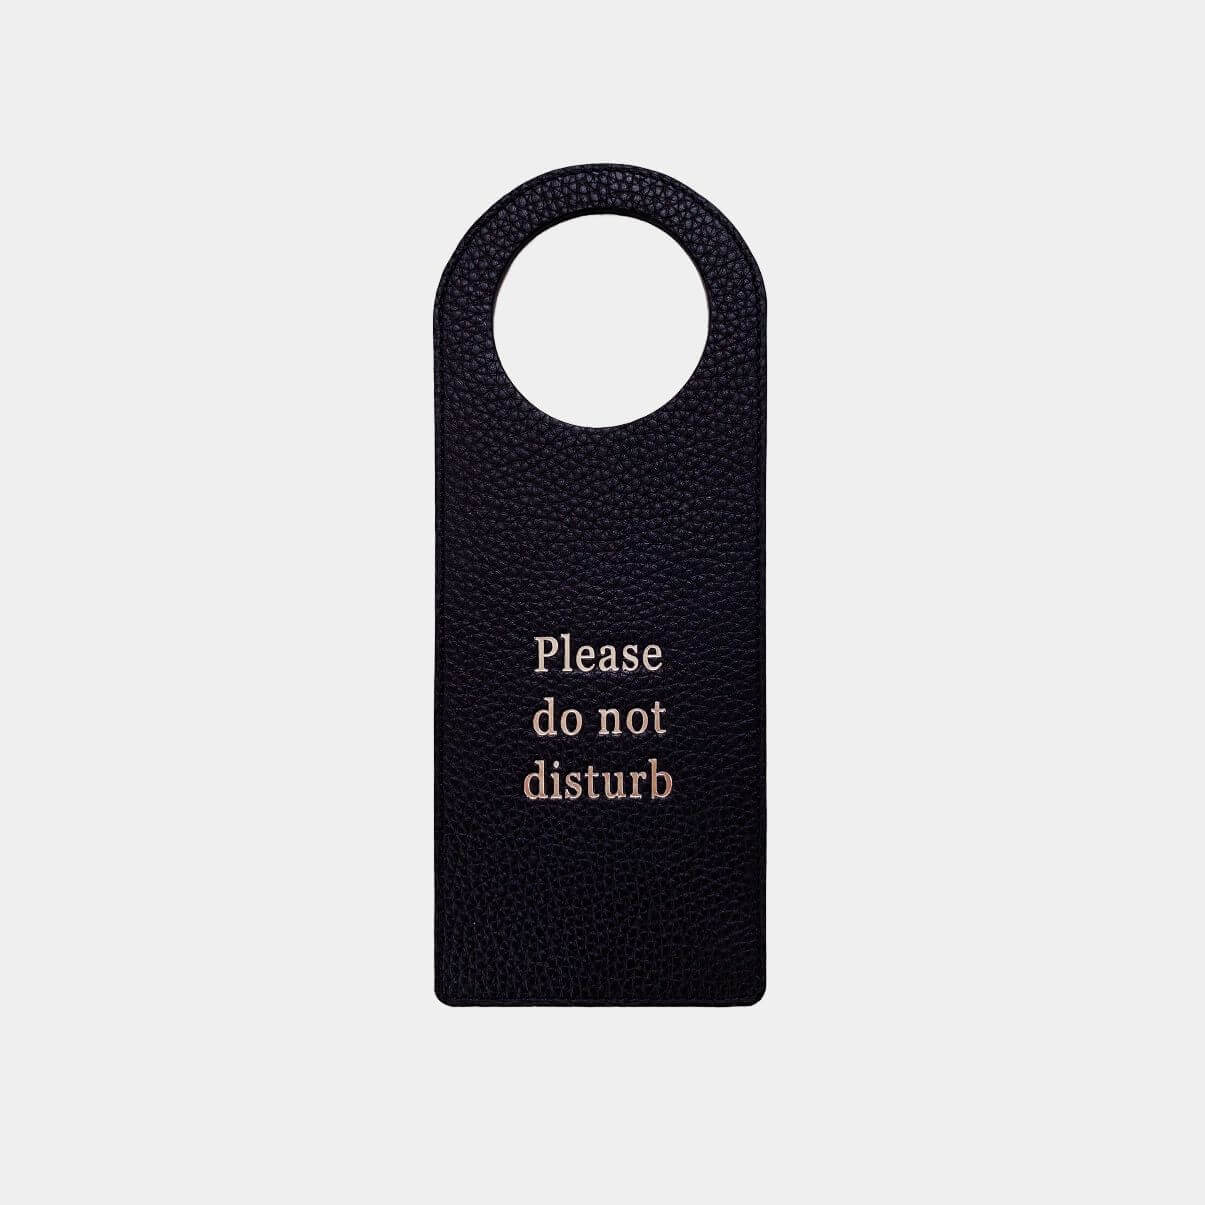 Luxury leather do not disturb sign for hotel doors